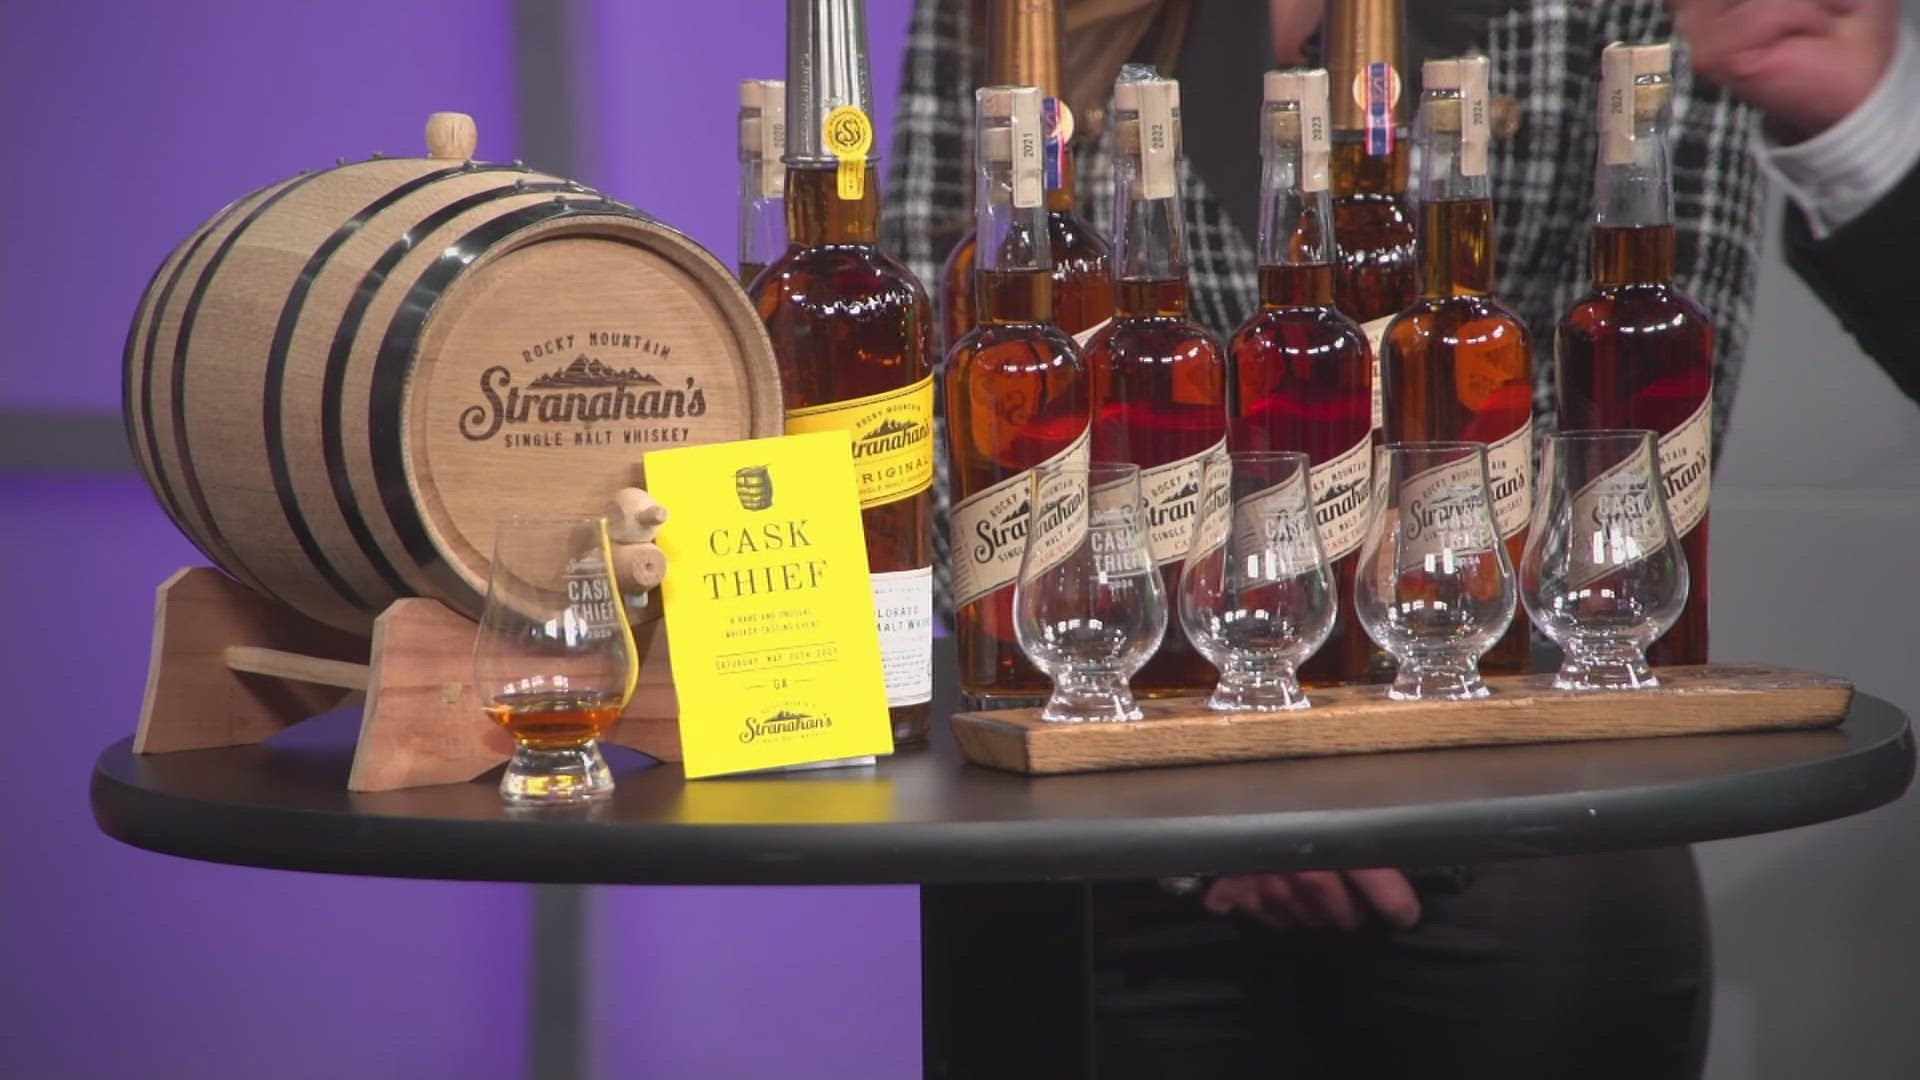 Stranahan's Whiskey Distillery is cracking open some of their rarest barrels for tastings on Saturday during the 9th annual Cast Thief event.